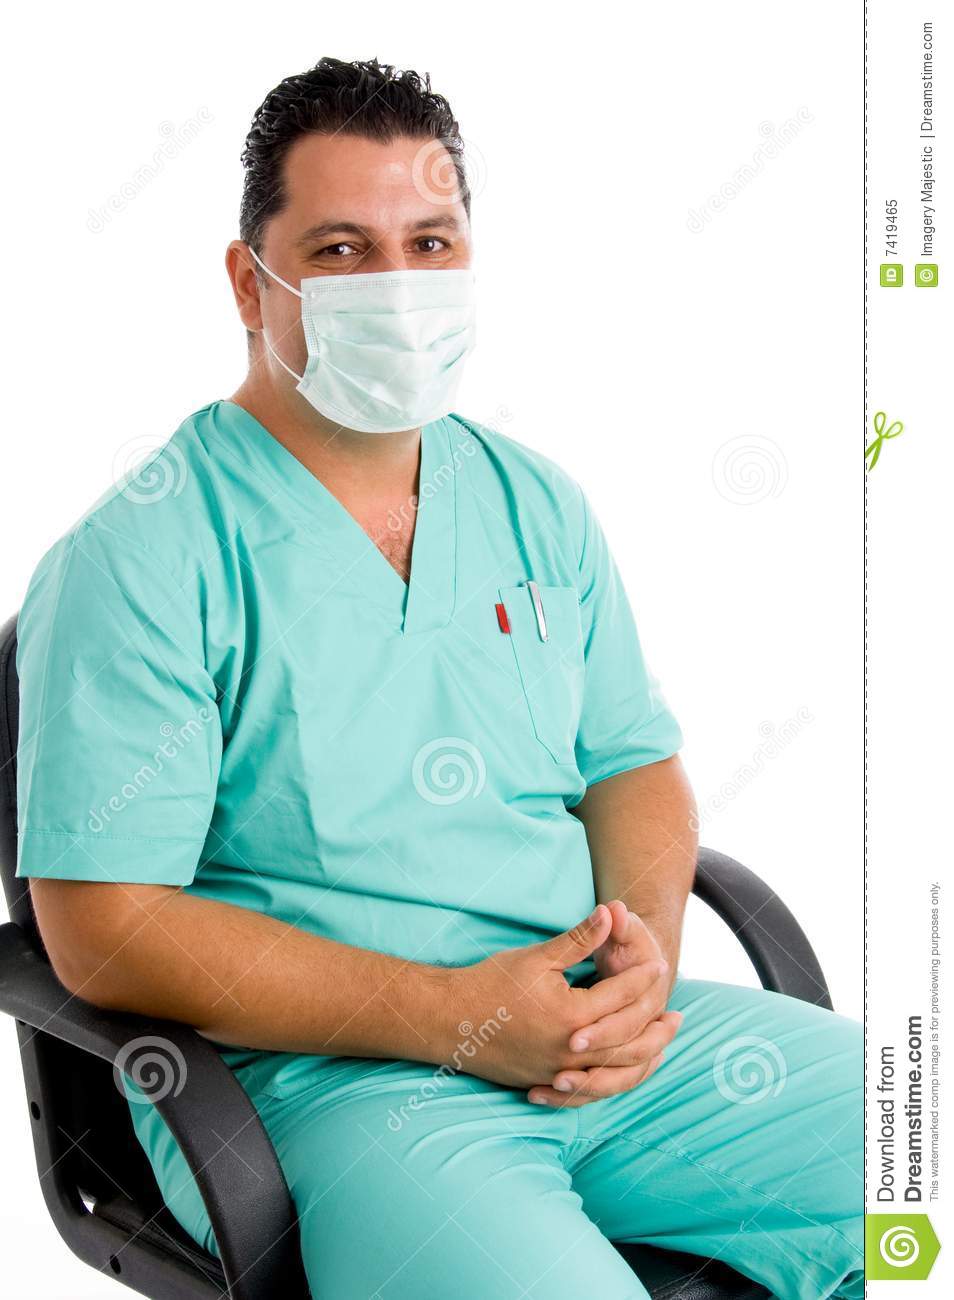 Surgeon With Face Mask Royalty Free Stock Photo   Image  7419465